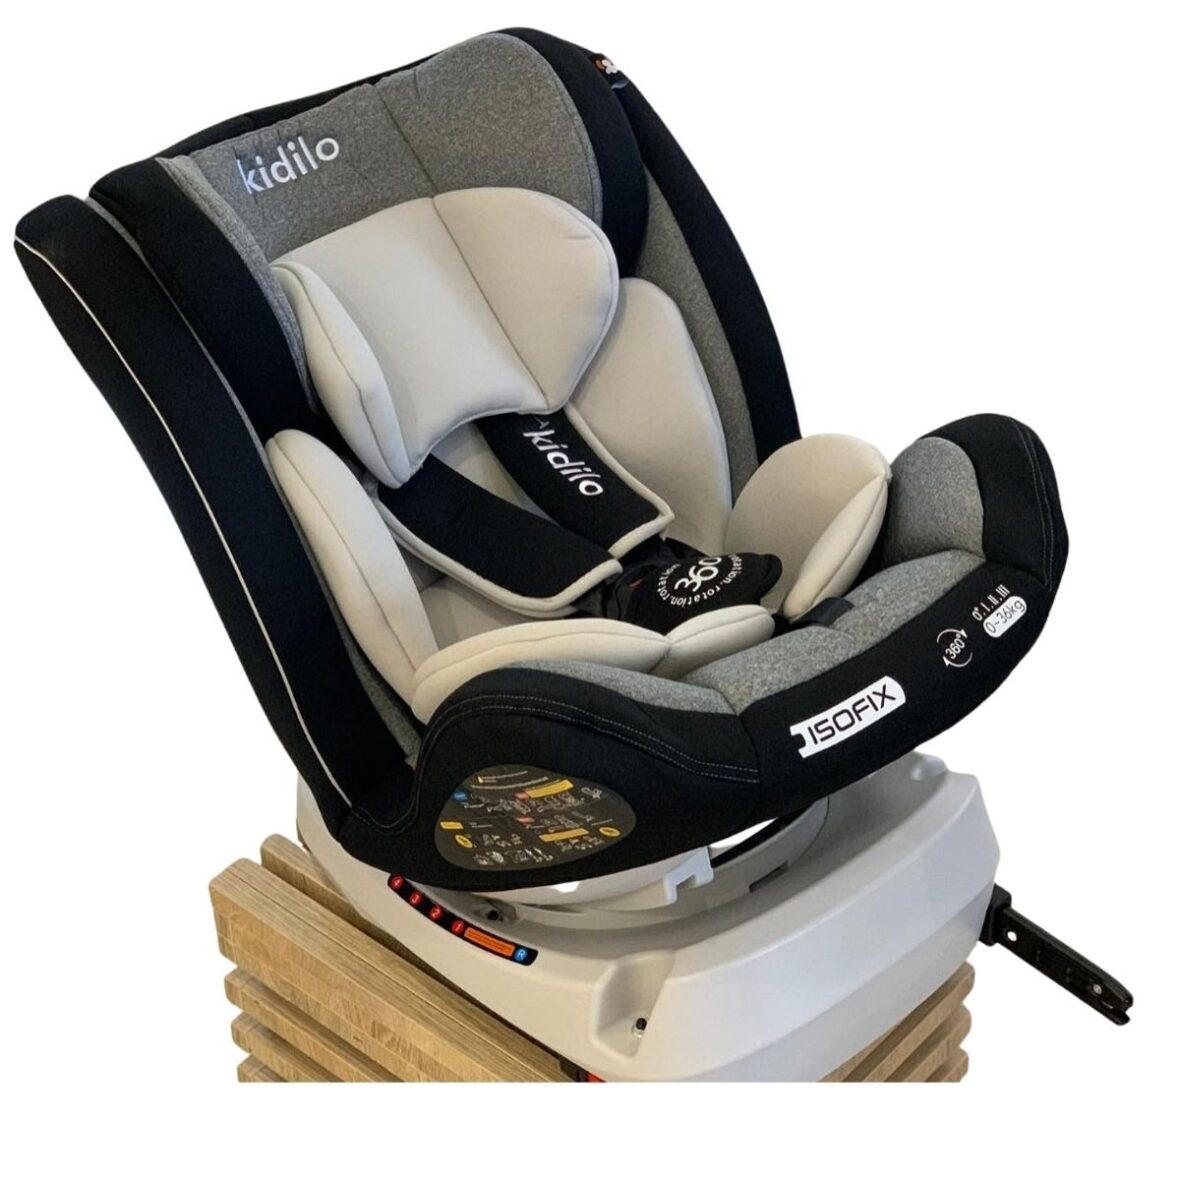 360-group-0123-car-seat-with-isofix-kidilo-16442269278608